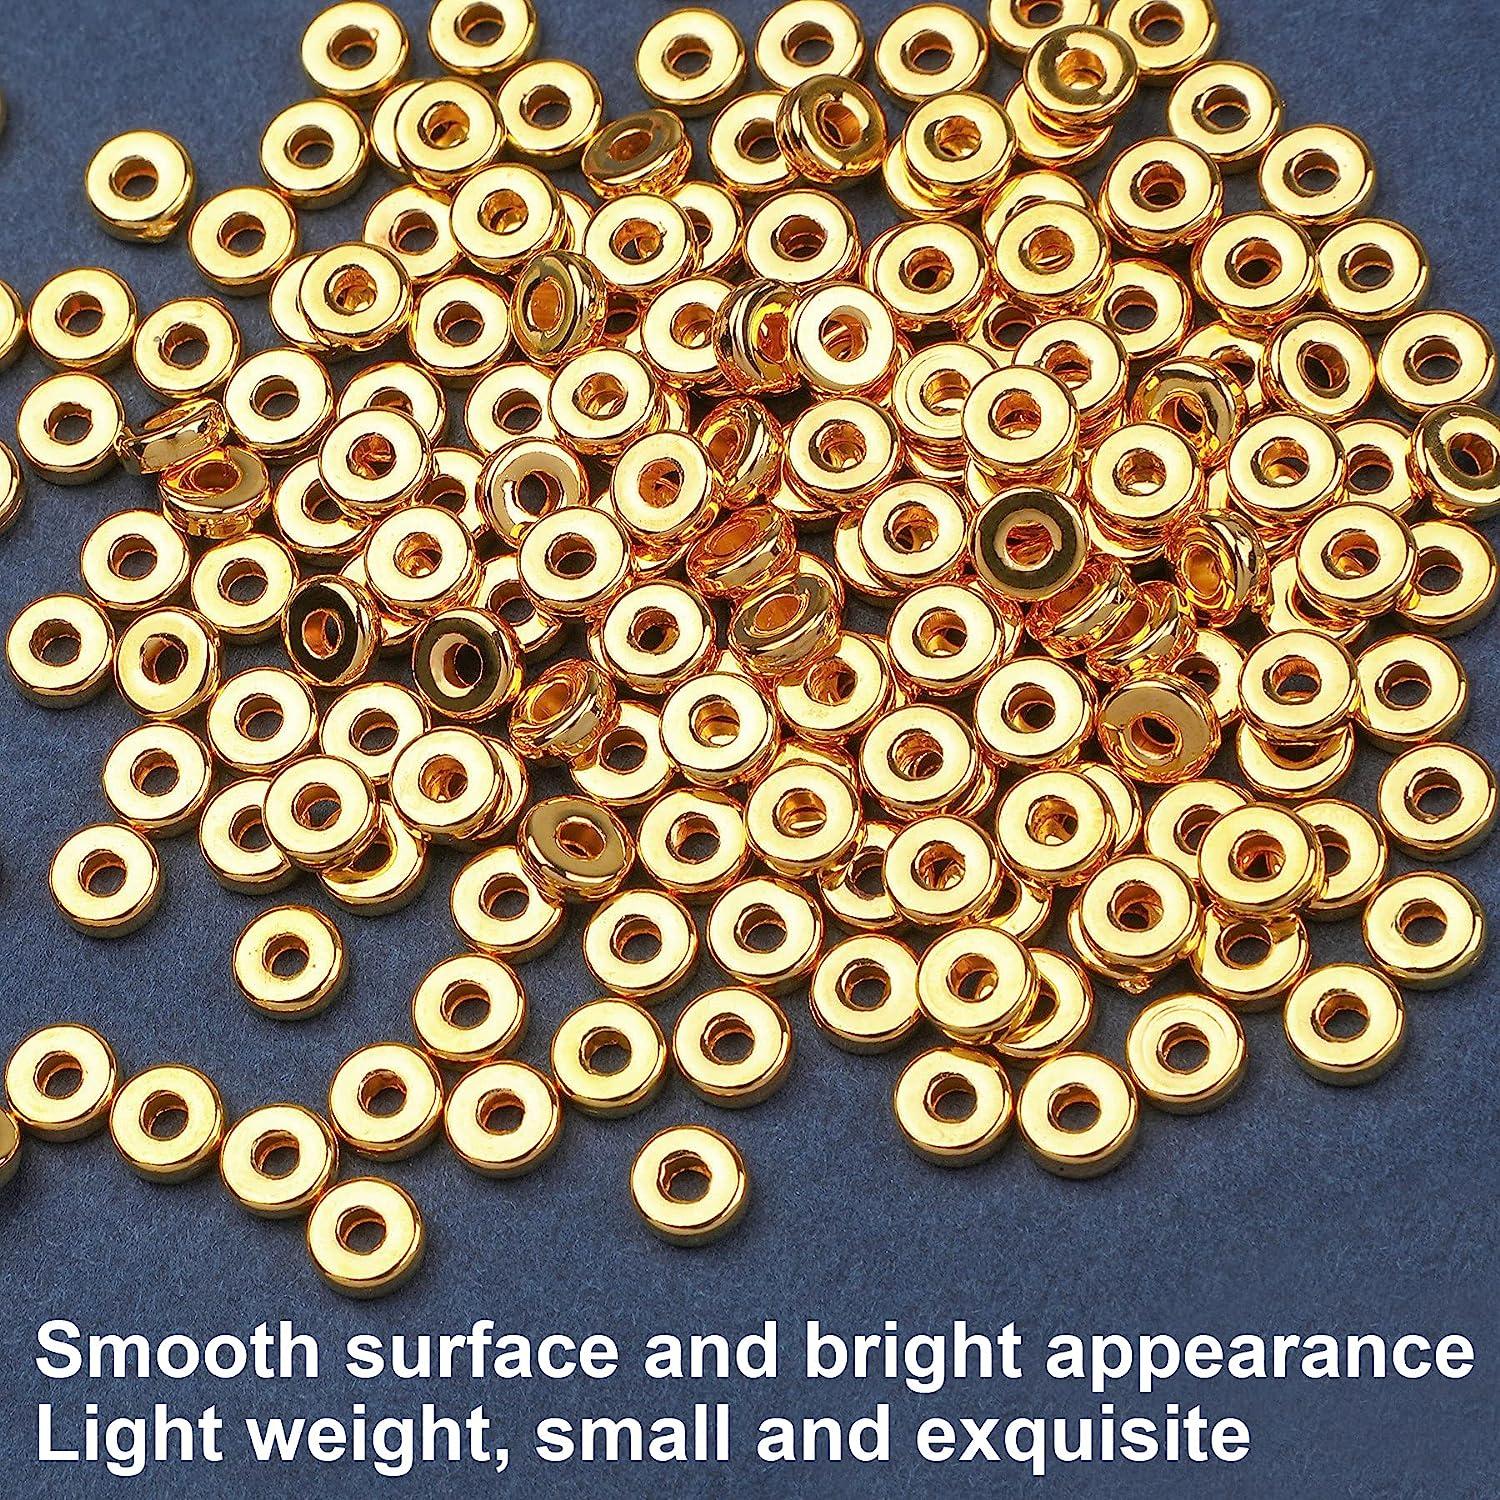 1500pcs 6mm Gold Flat Round Spacer Beads Disc Loose Jewelry Making Beads  for DIY Bracelet Necklace Earring Craft Supplies